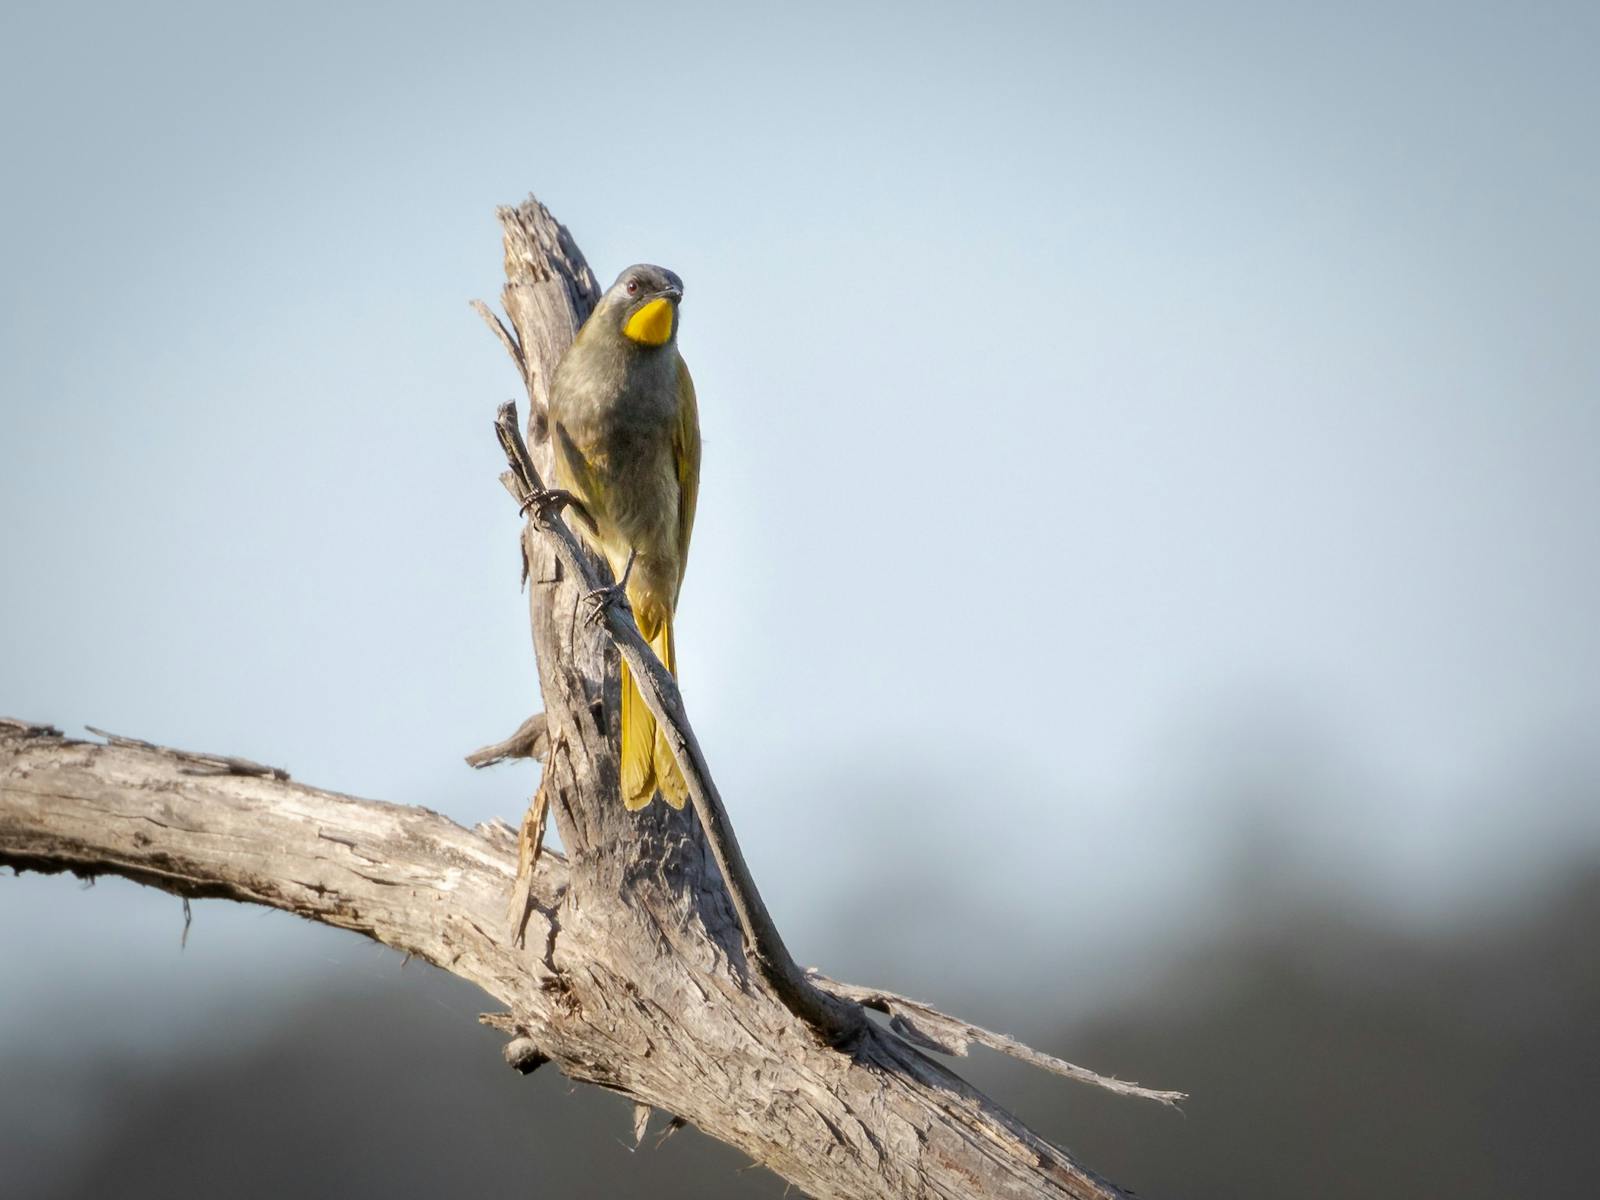 Yellow-throated Honeyeater perched on branch